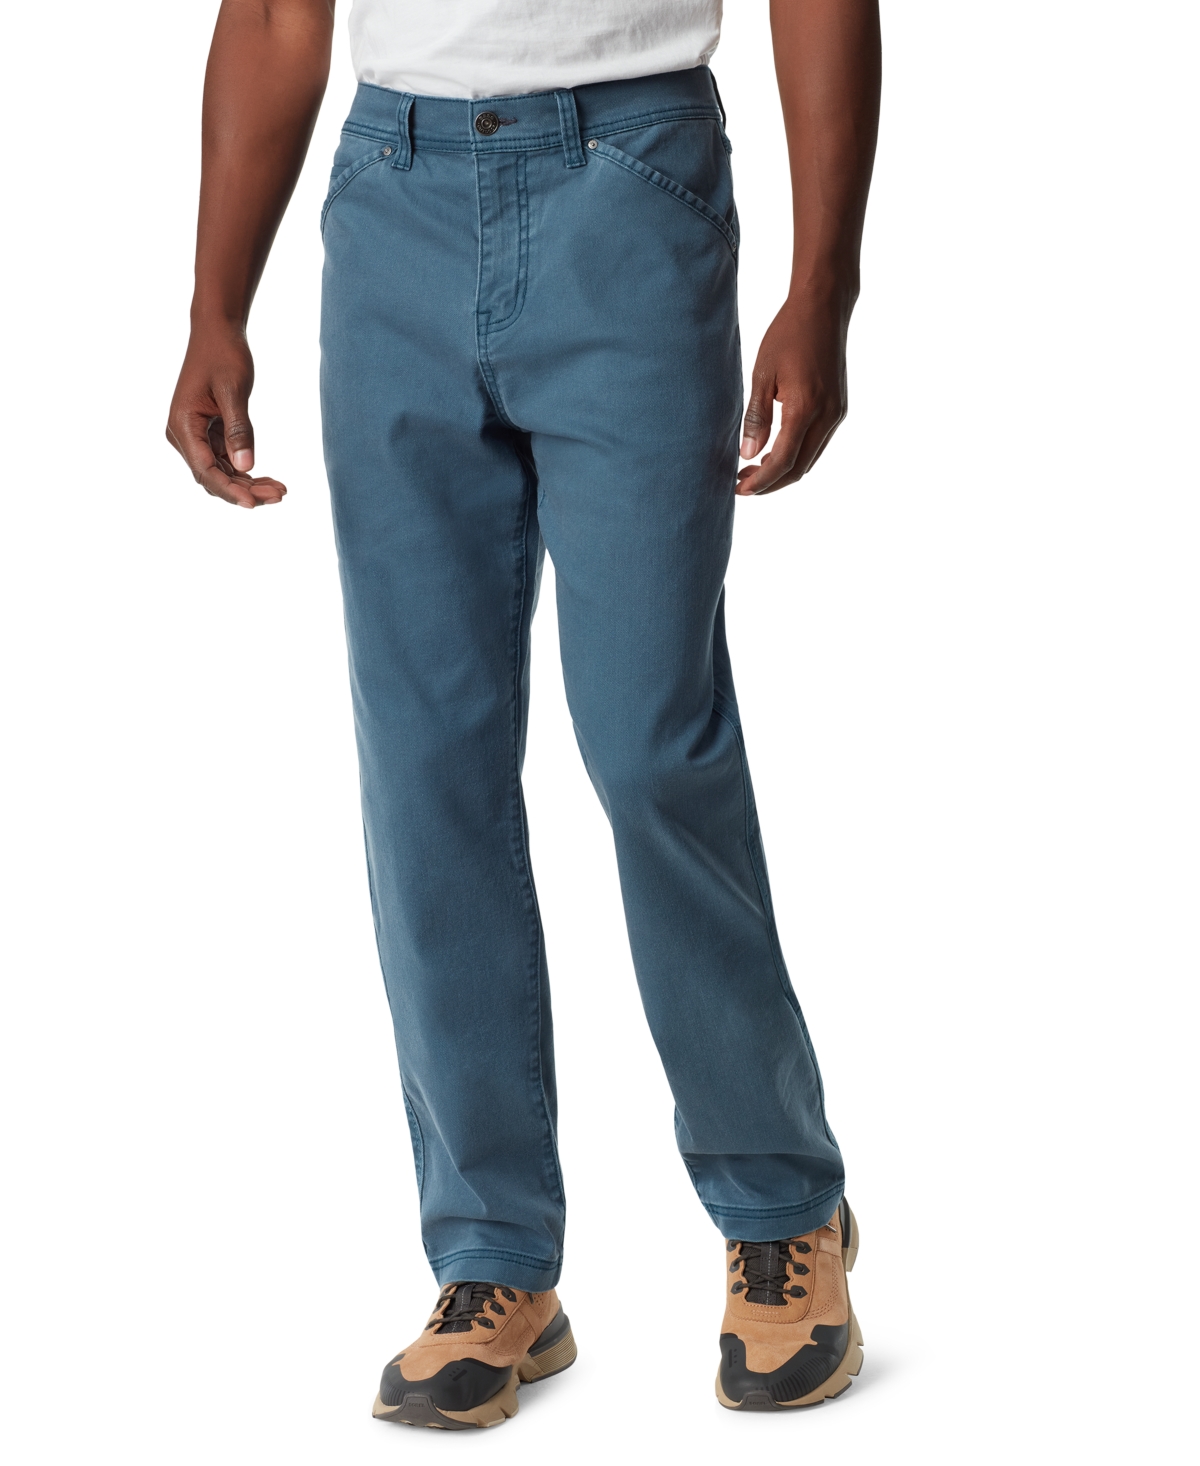 Men's Straight-Fit Everyday Pants - Ermine